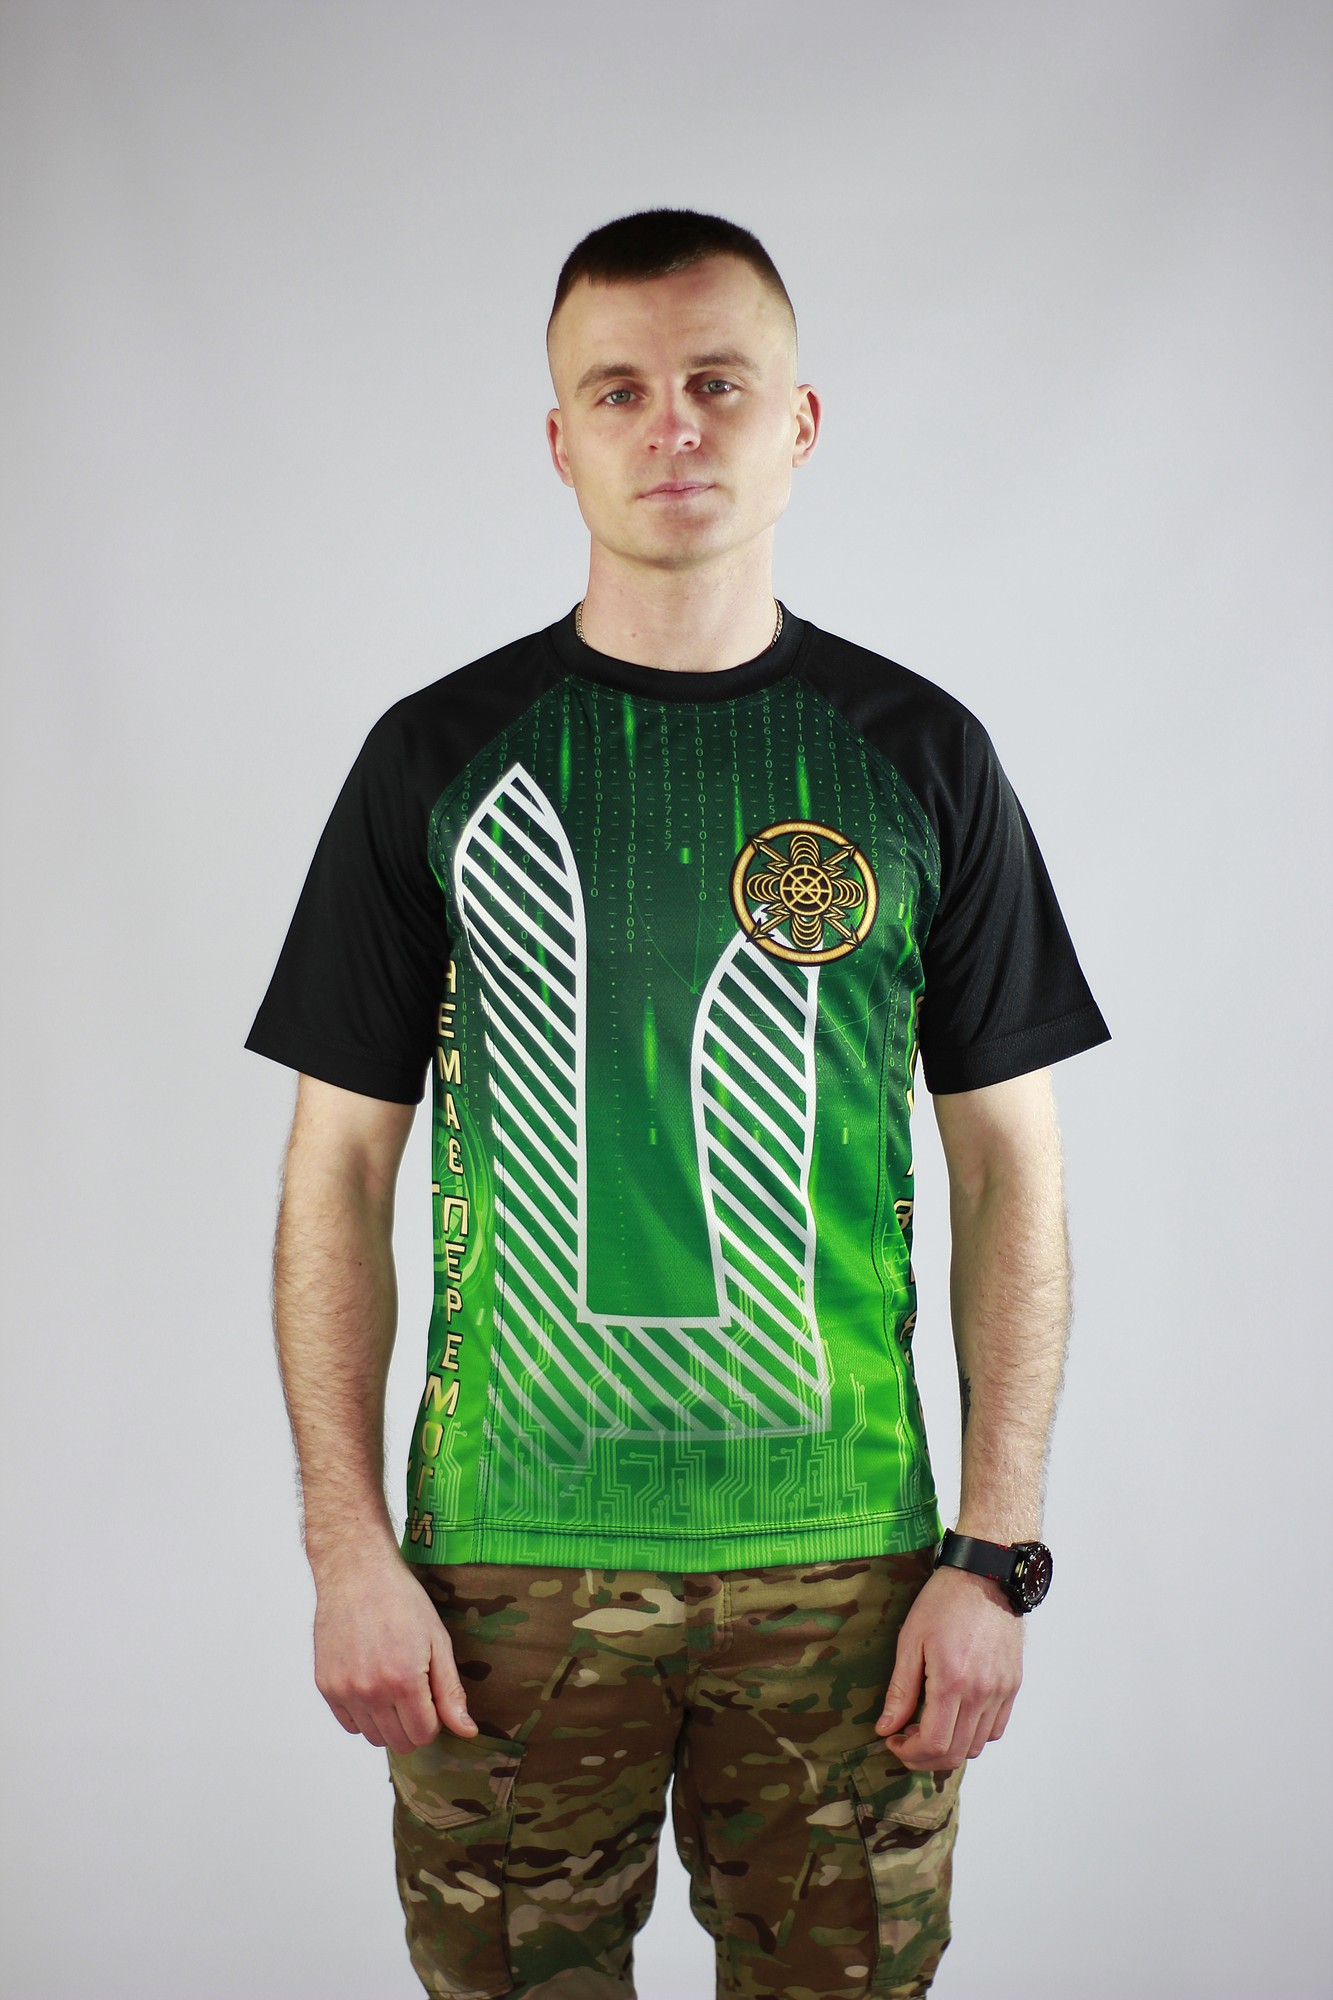 T-shirt of the Communications and Cyber Security Forces of UKRAINE KRAMATAN Tactical Design